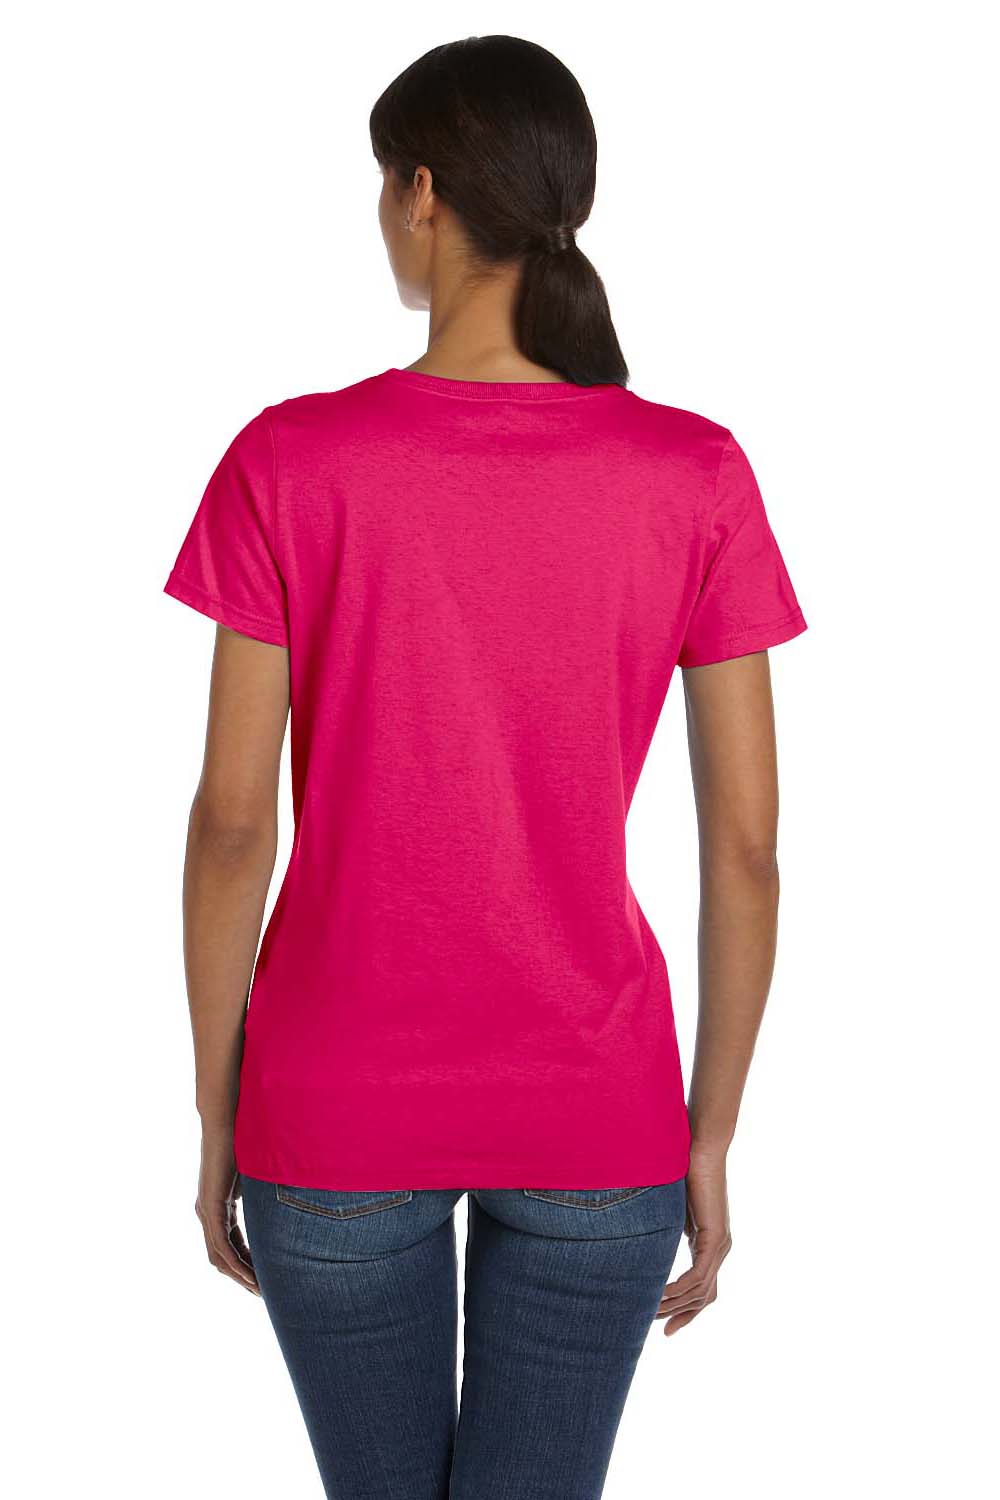 Fruit Of The Loom L3930R Womens HD Jersey Short Sleeve Crewneck T-Shirt Cyber Pink Back